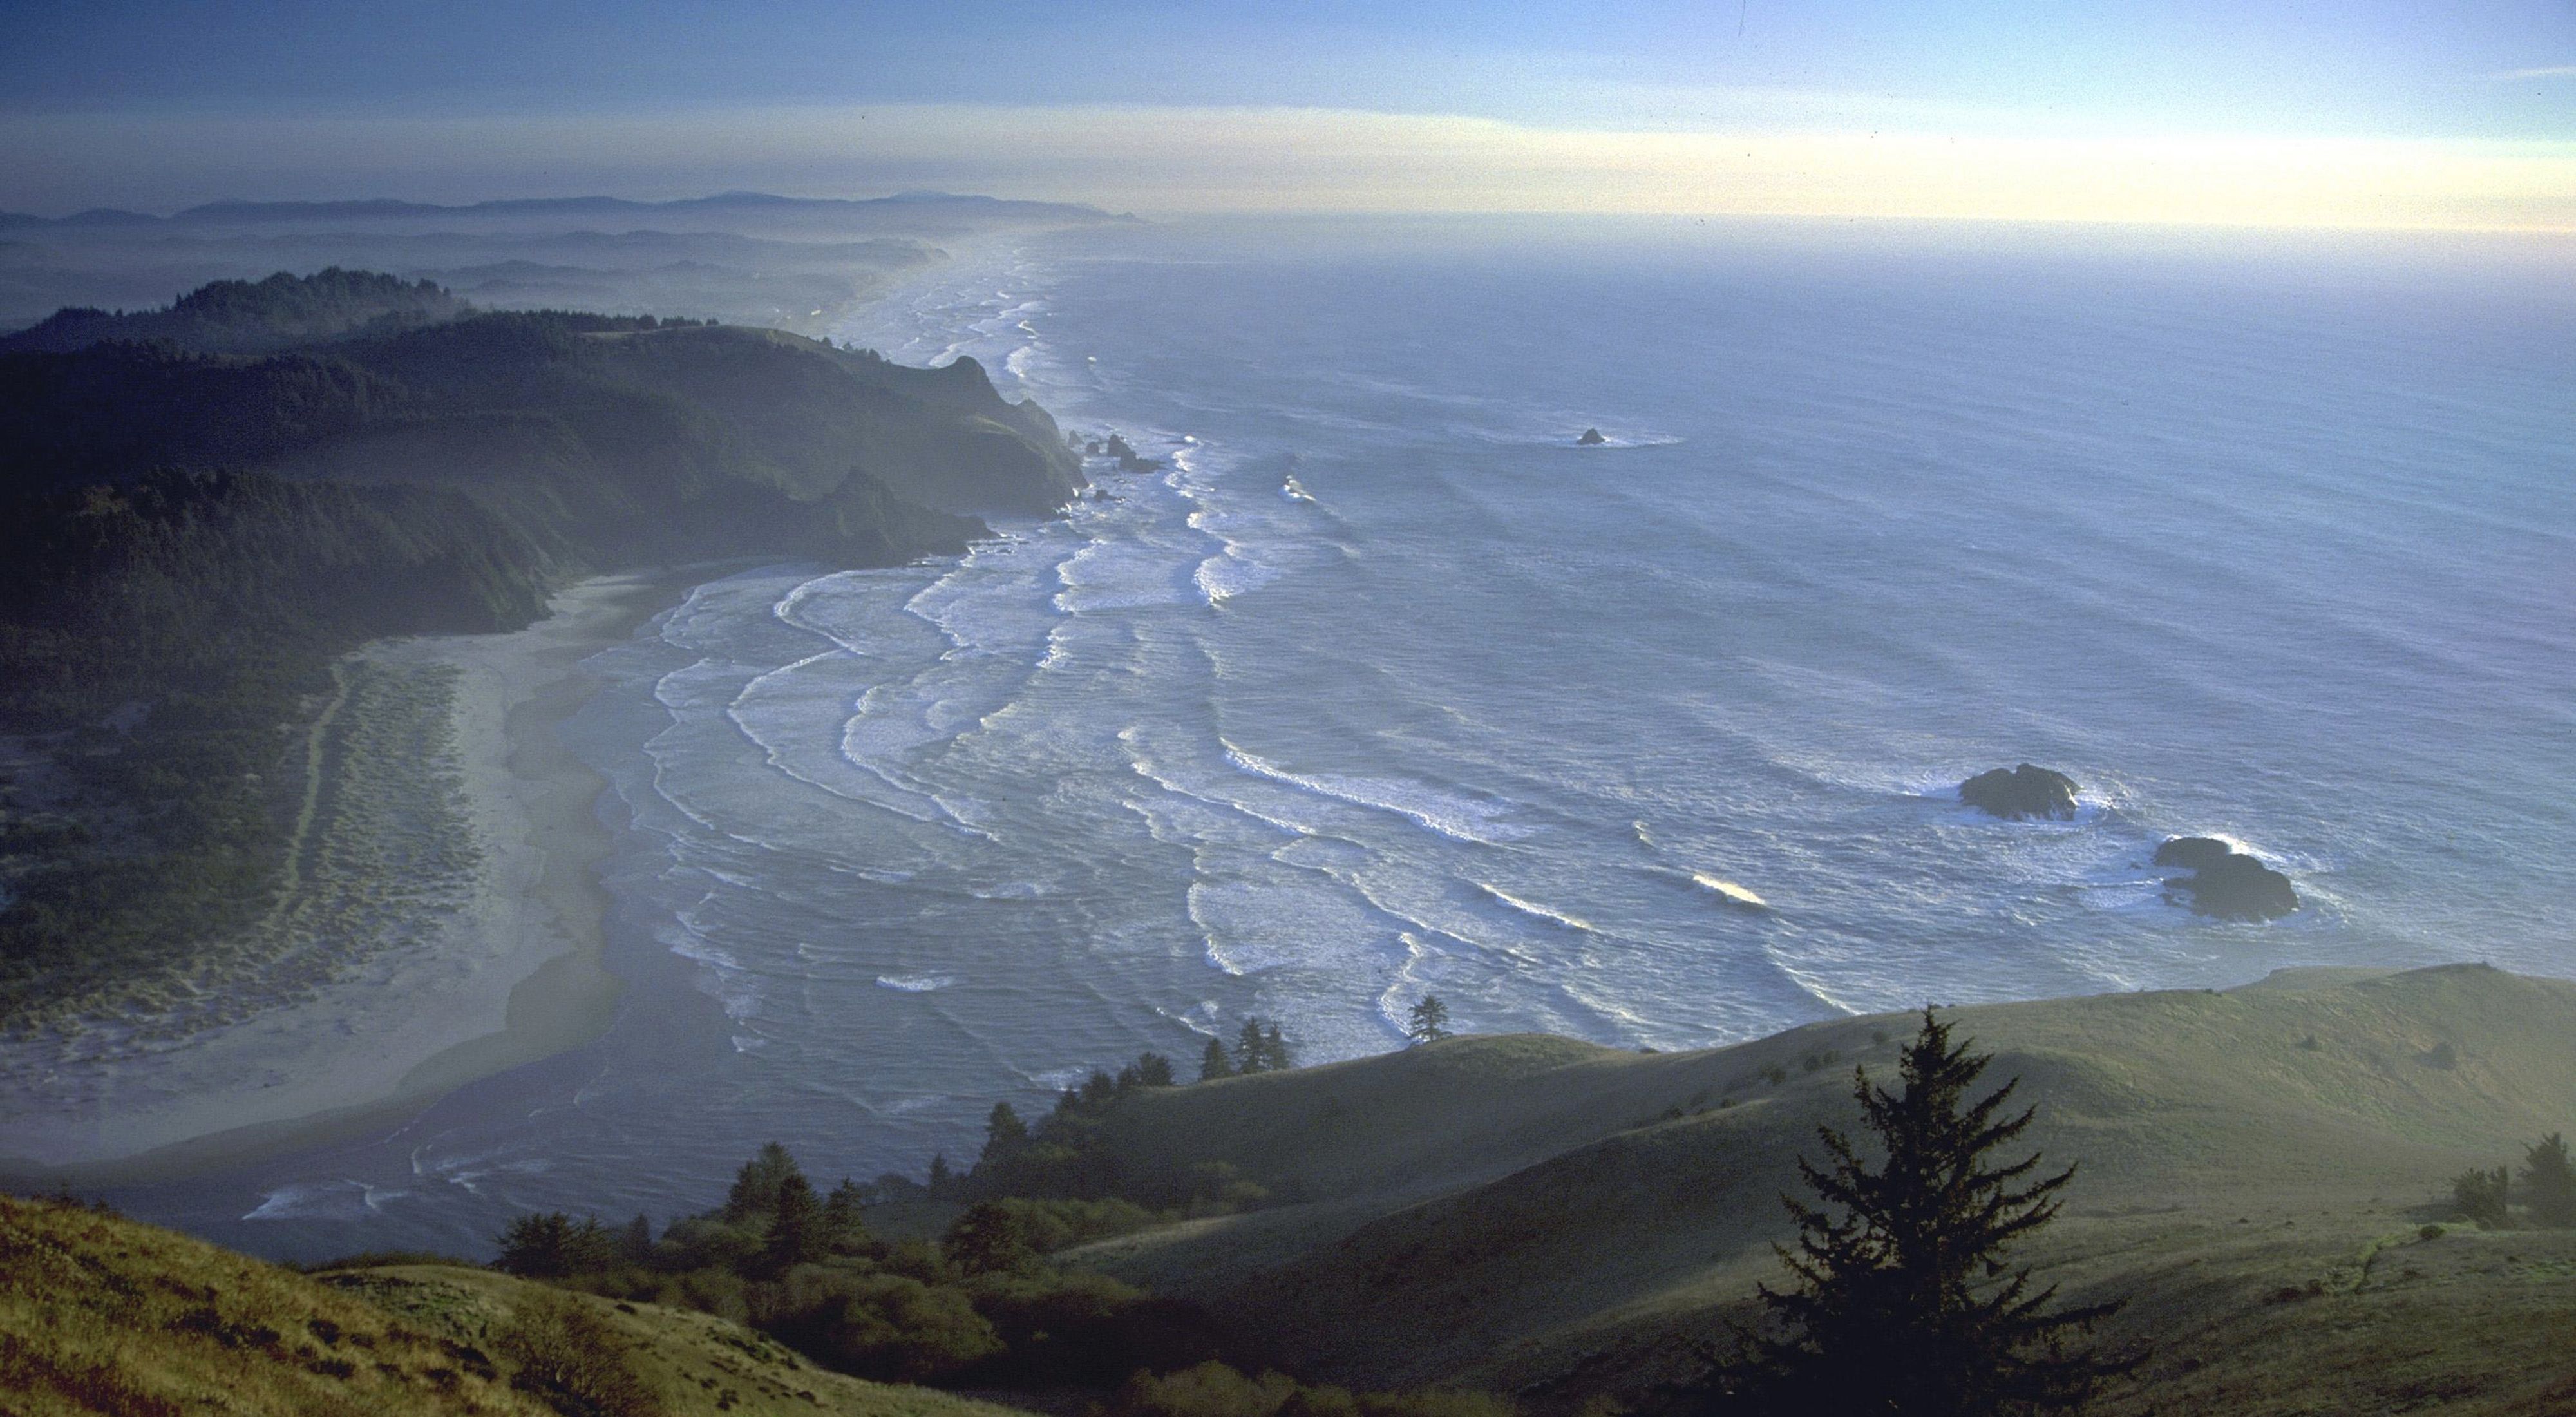 View of the ocean and rugged coastline from a high vantage point at Cascade Head Preserve, Oregon.